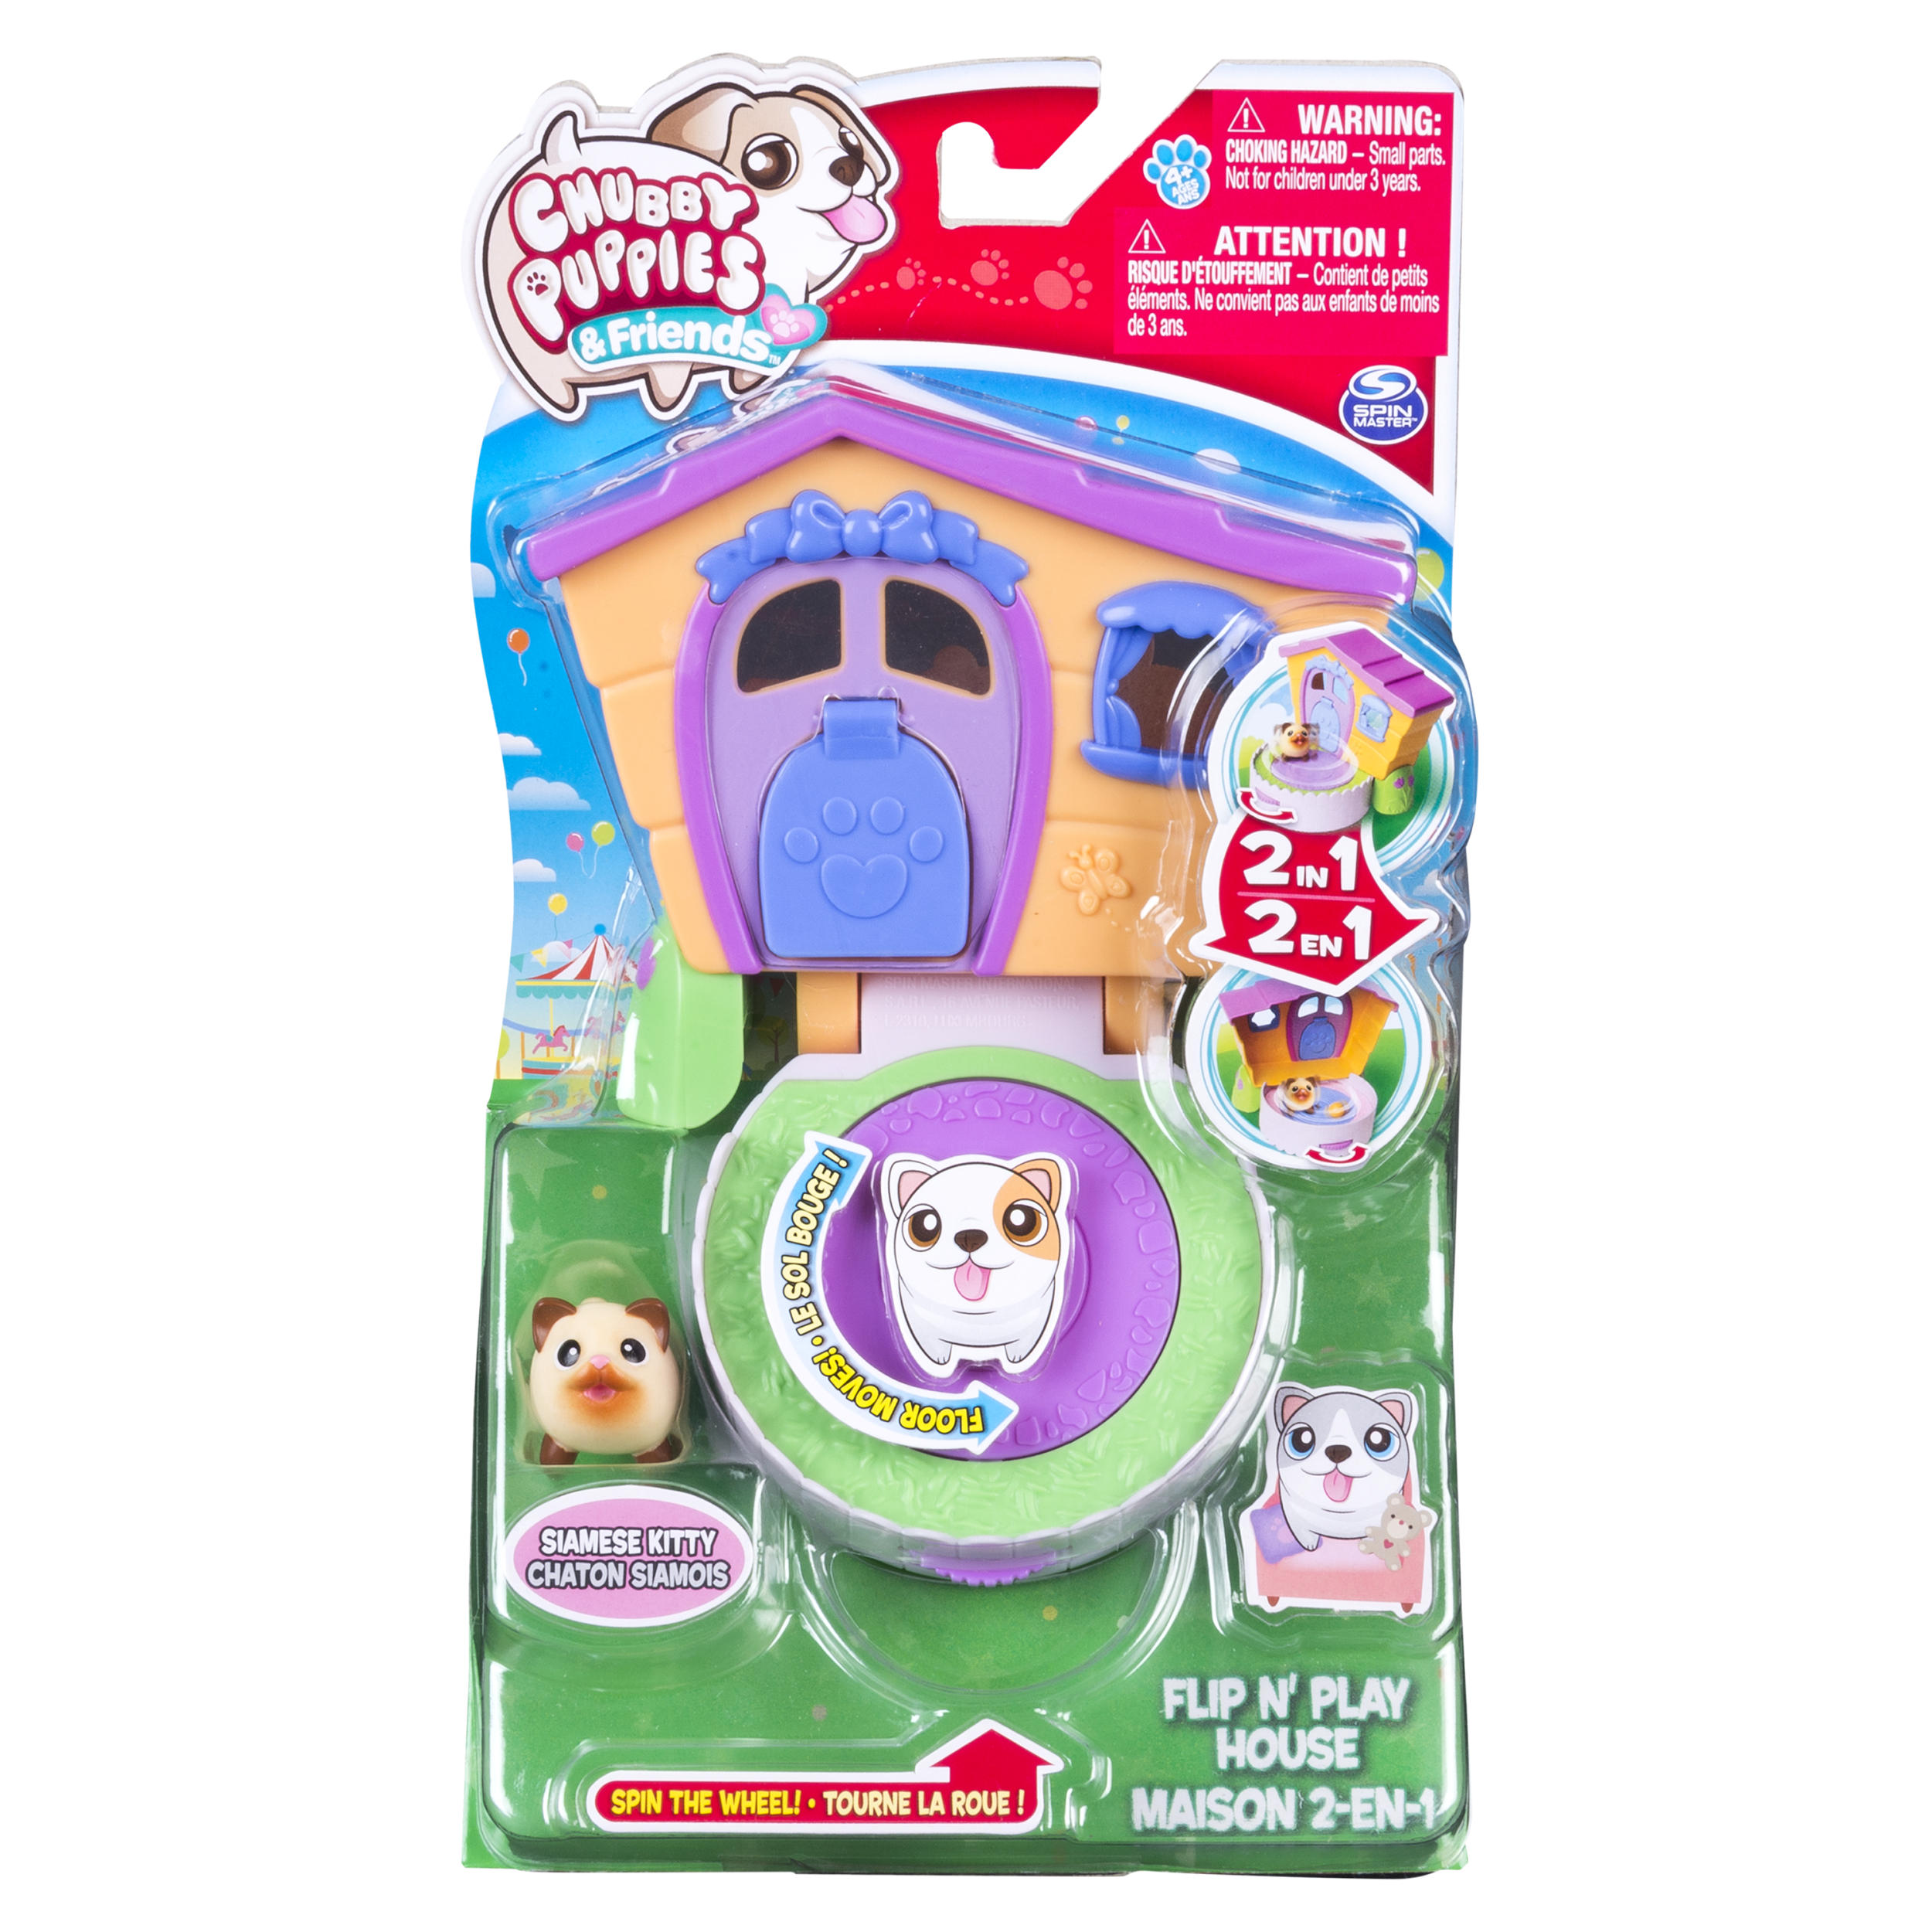 Chubby Puppies & Friends ? 2-in 1 Flip N? Play House Playset with Siamese Kitty Collectible Figure - image 2 of 6